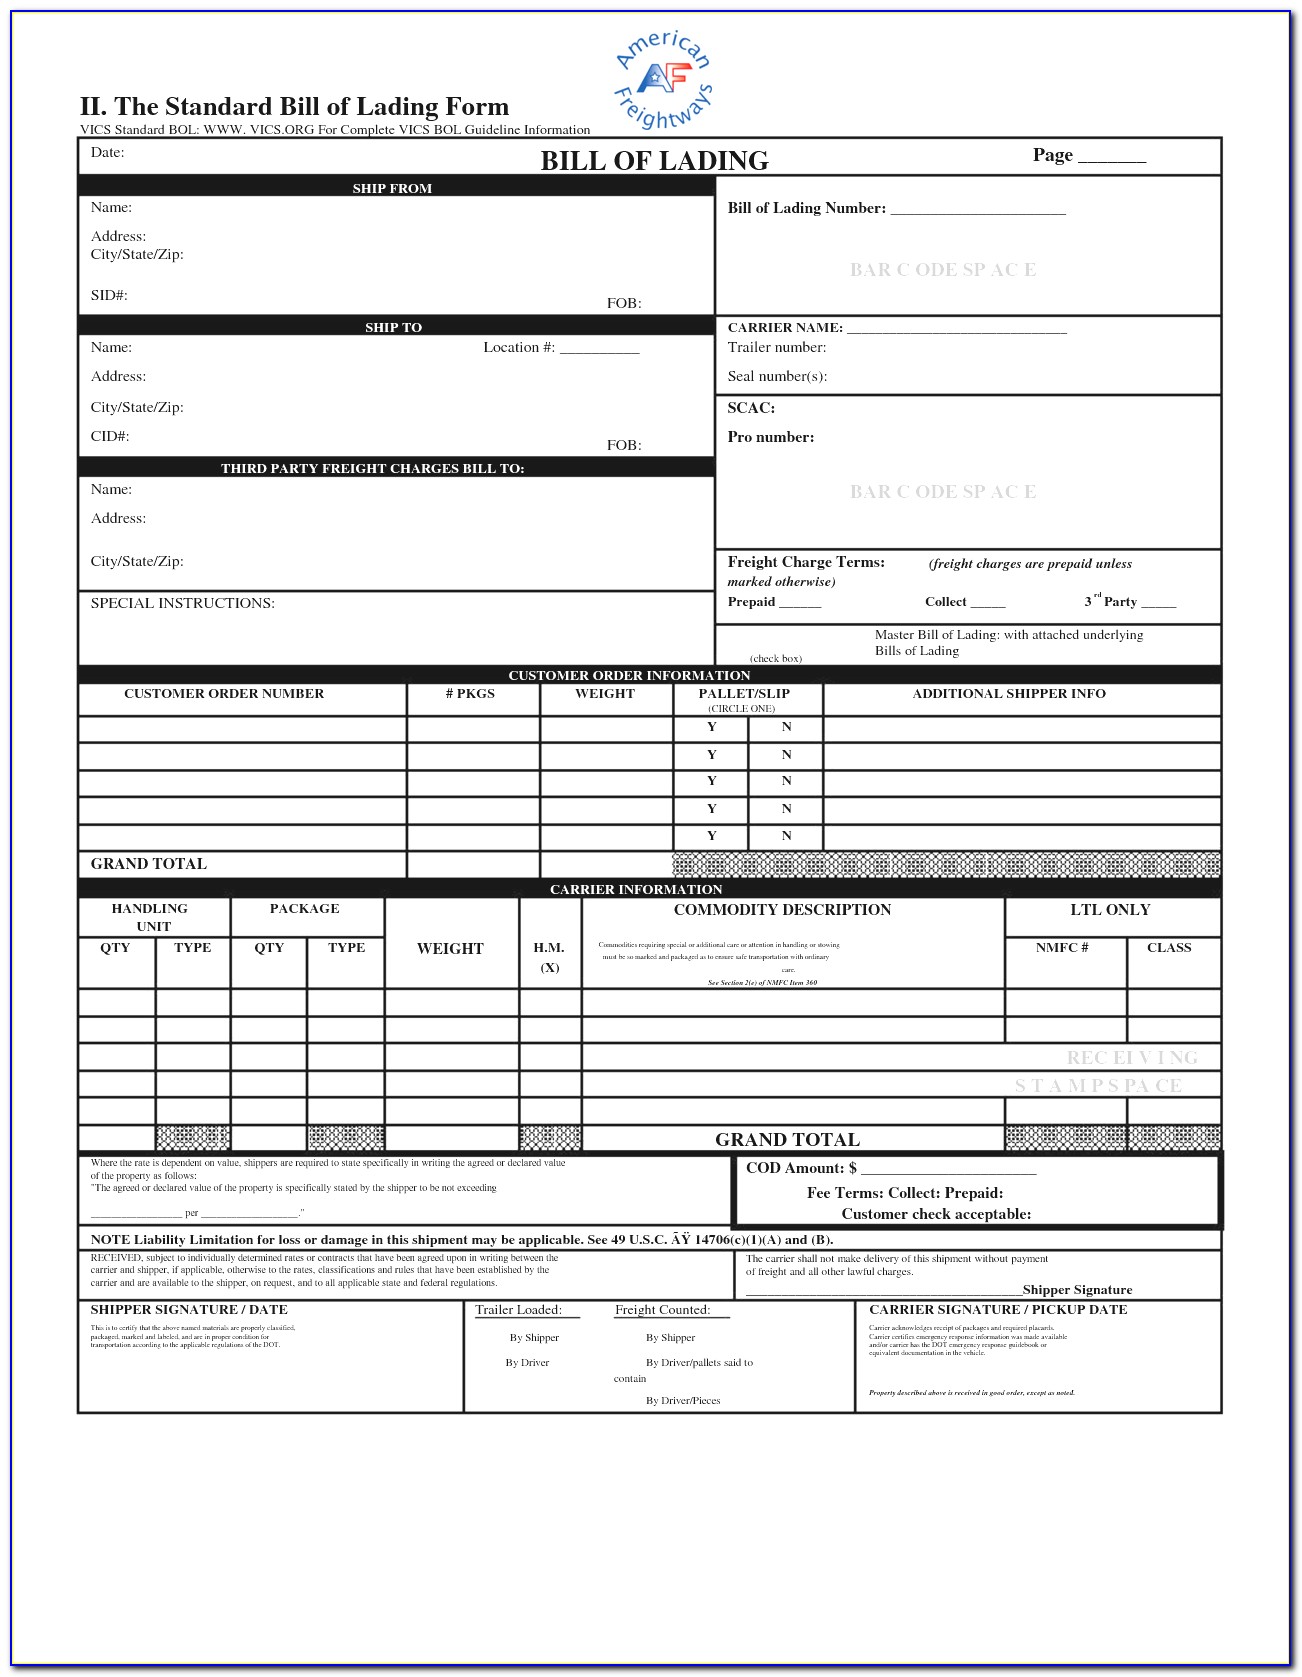 free-bill-of-lading-forms-printable-form-resume-examples-bx5ayen5ww